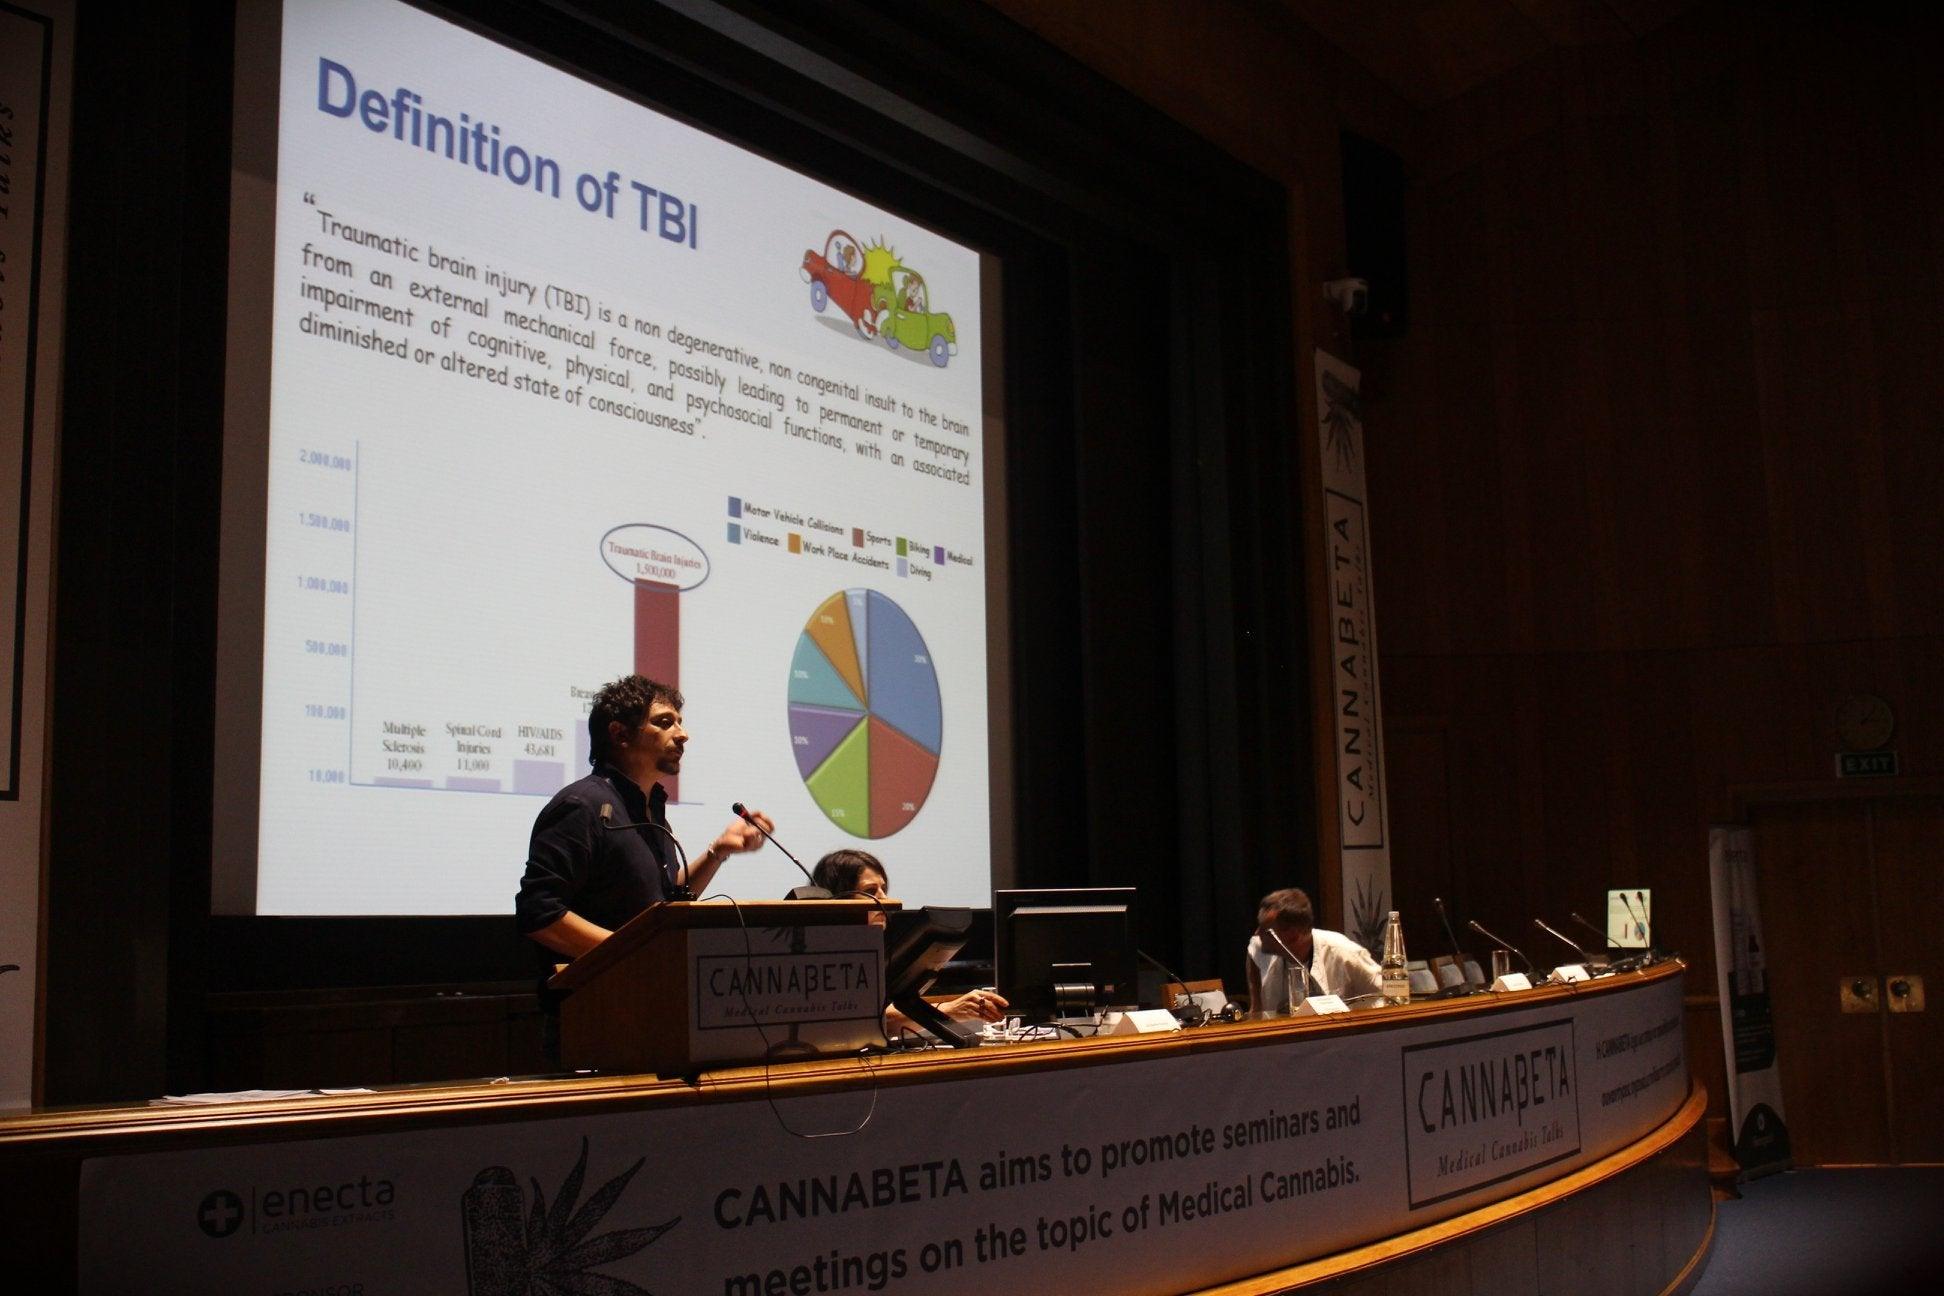 Promoted by Enecta and organised in collaboration Mamaka Cannabis Bureau Greece